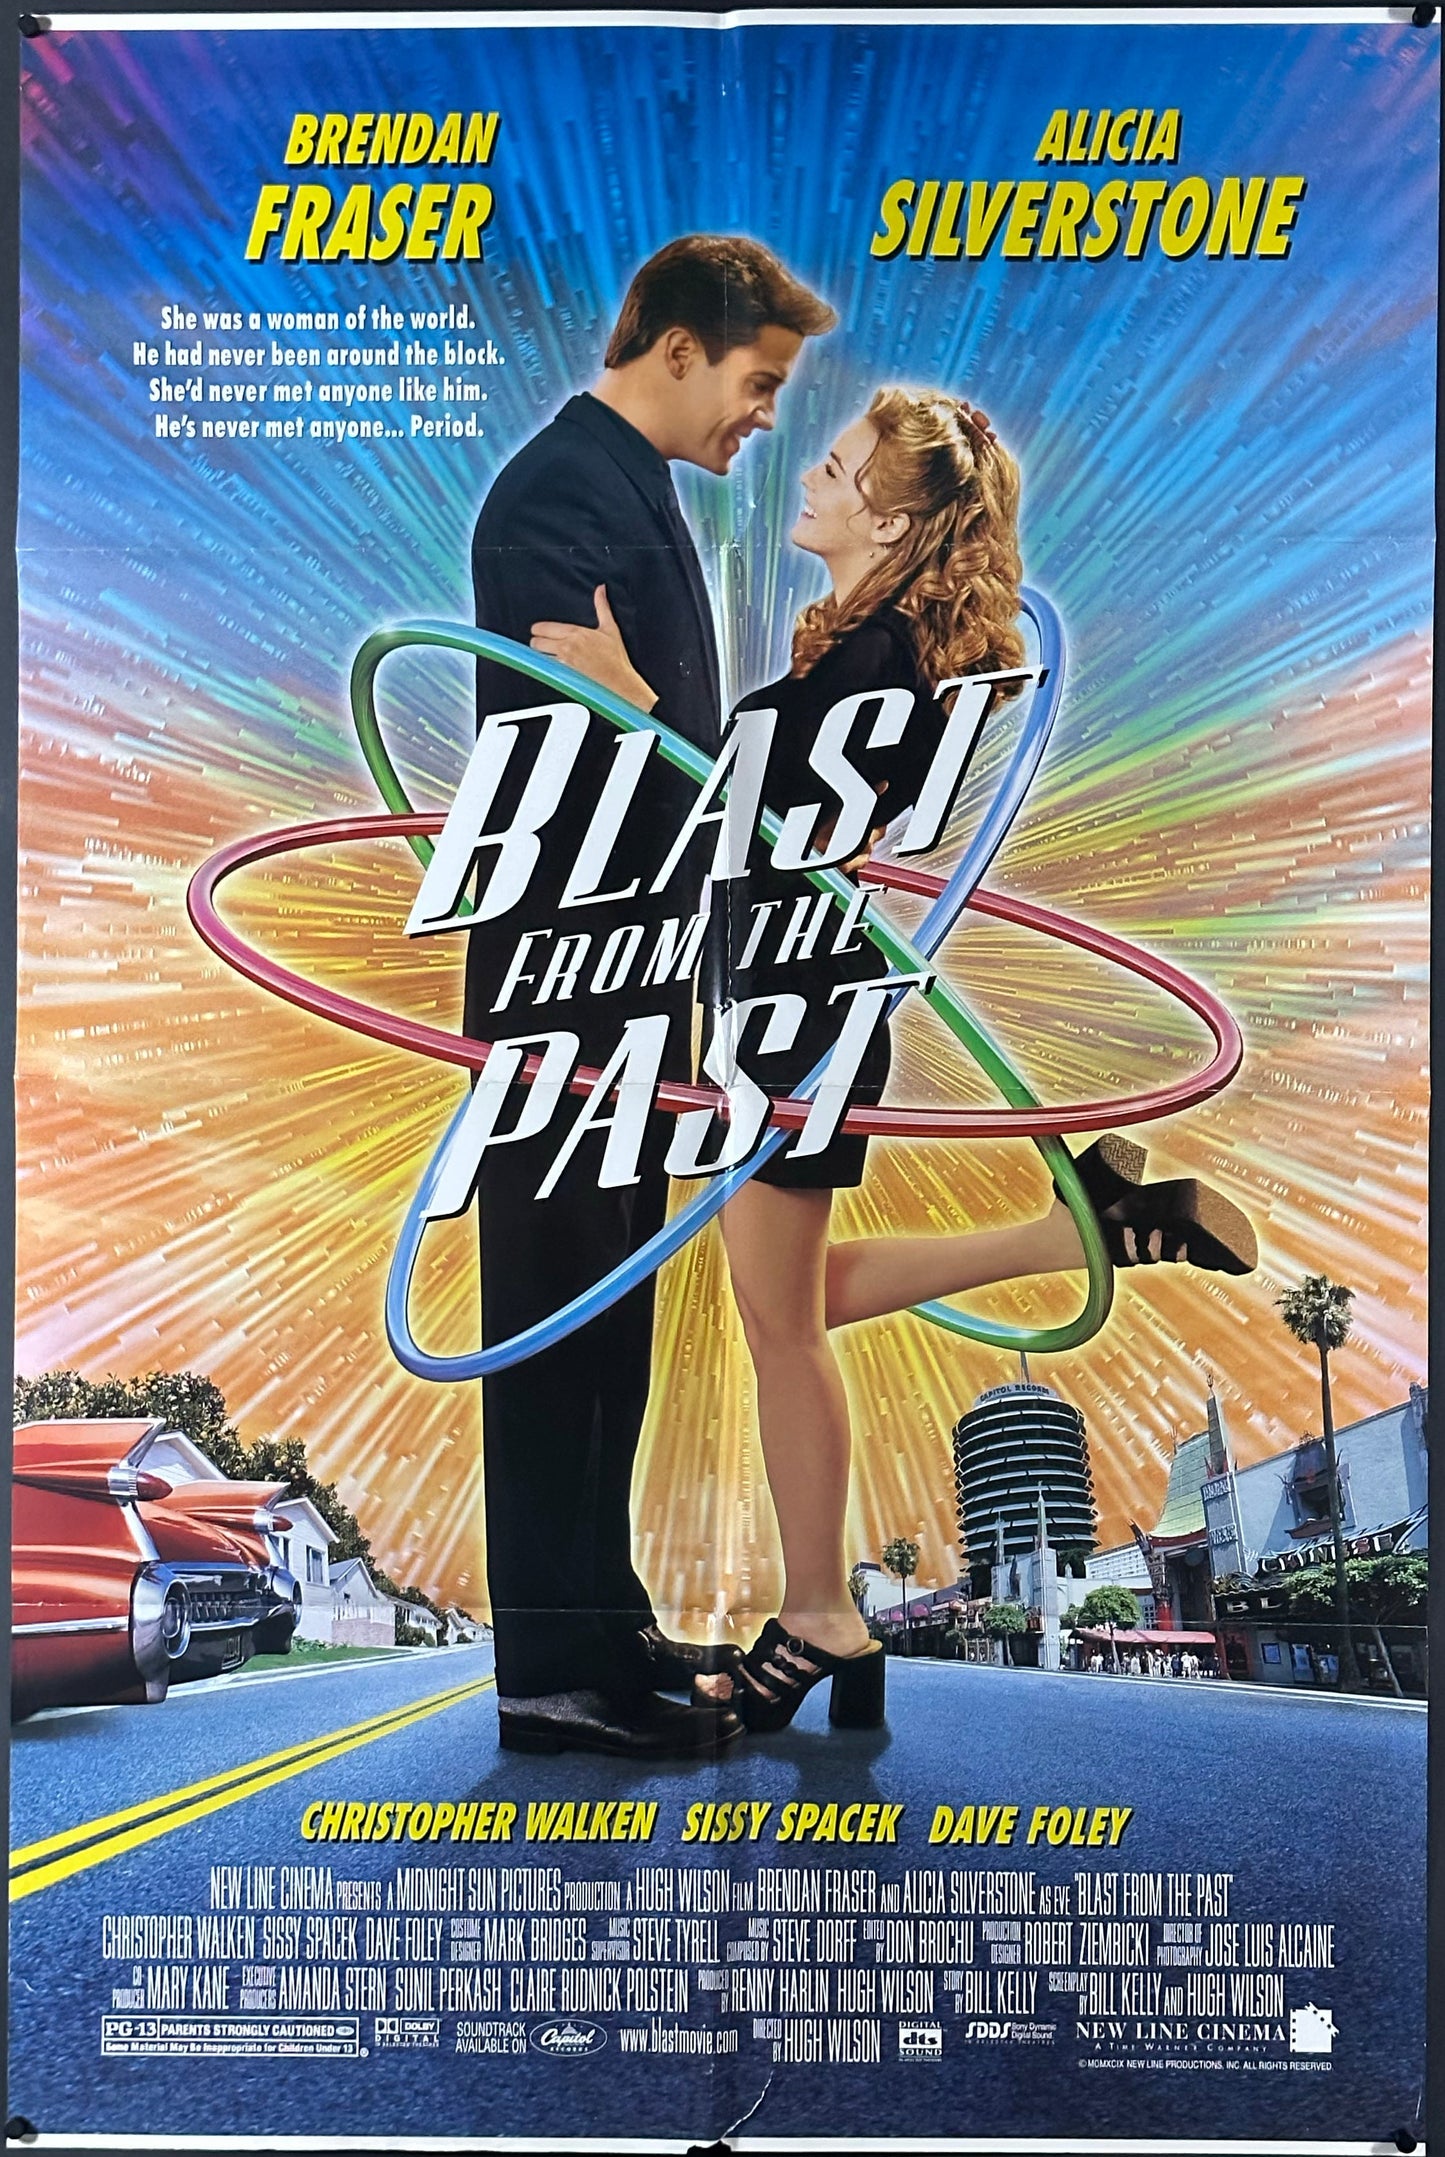 Blast From The Past US One Sheet (1999) - ORIGINAL RELEASE - posterpalace.com